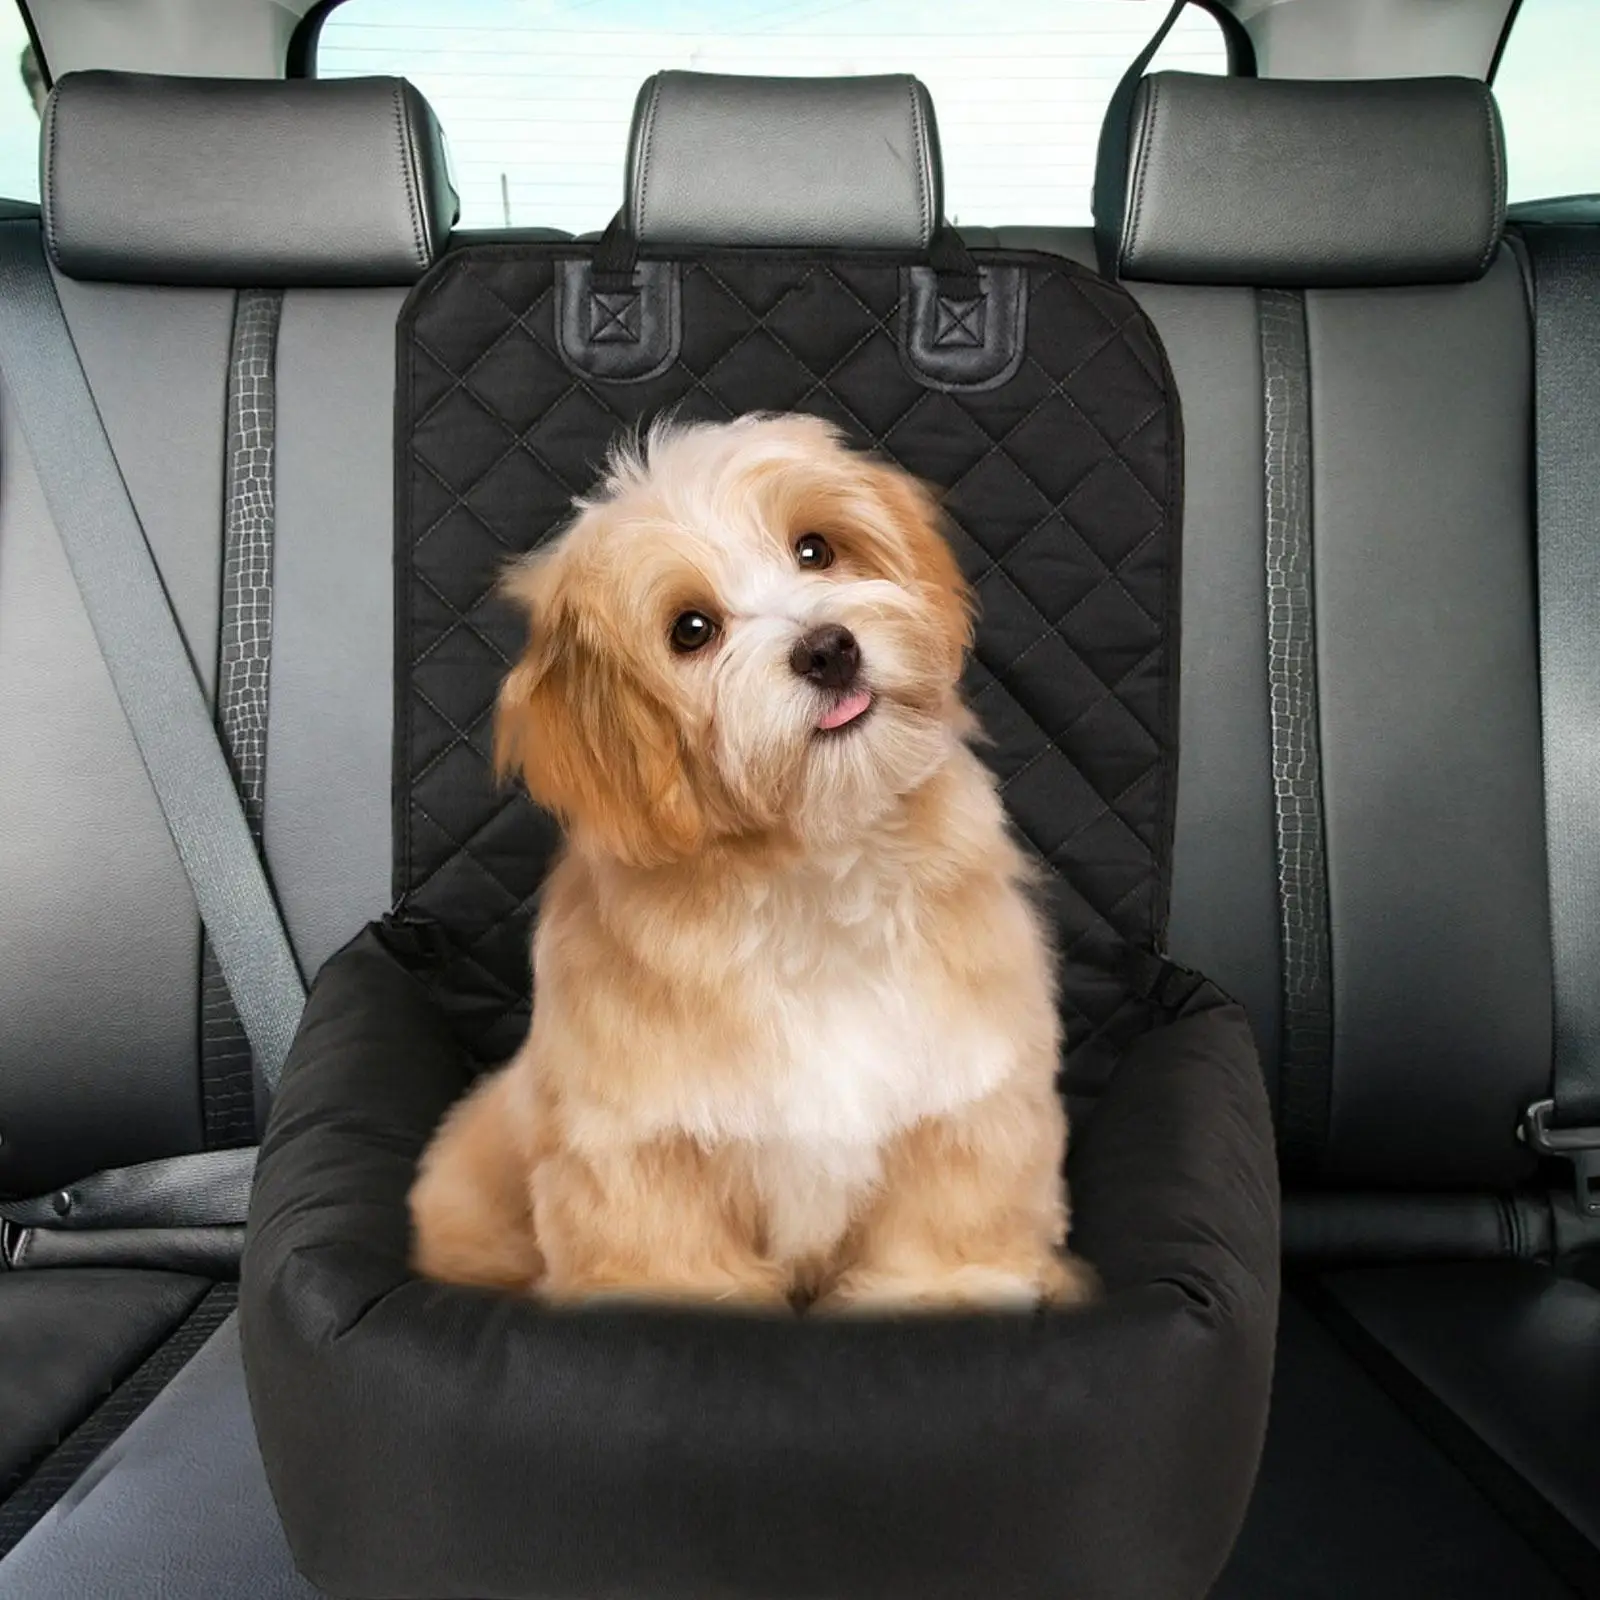 Dog Car Seats for Small and Medium Pets, Stable Center Console Dog Seat Seat,